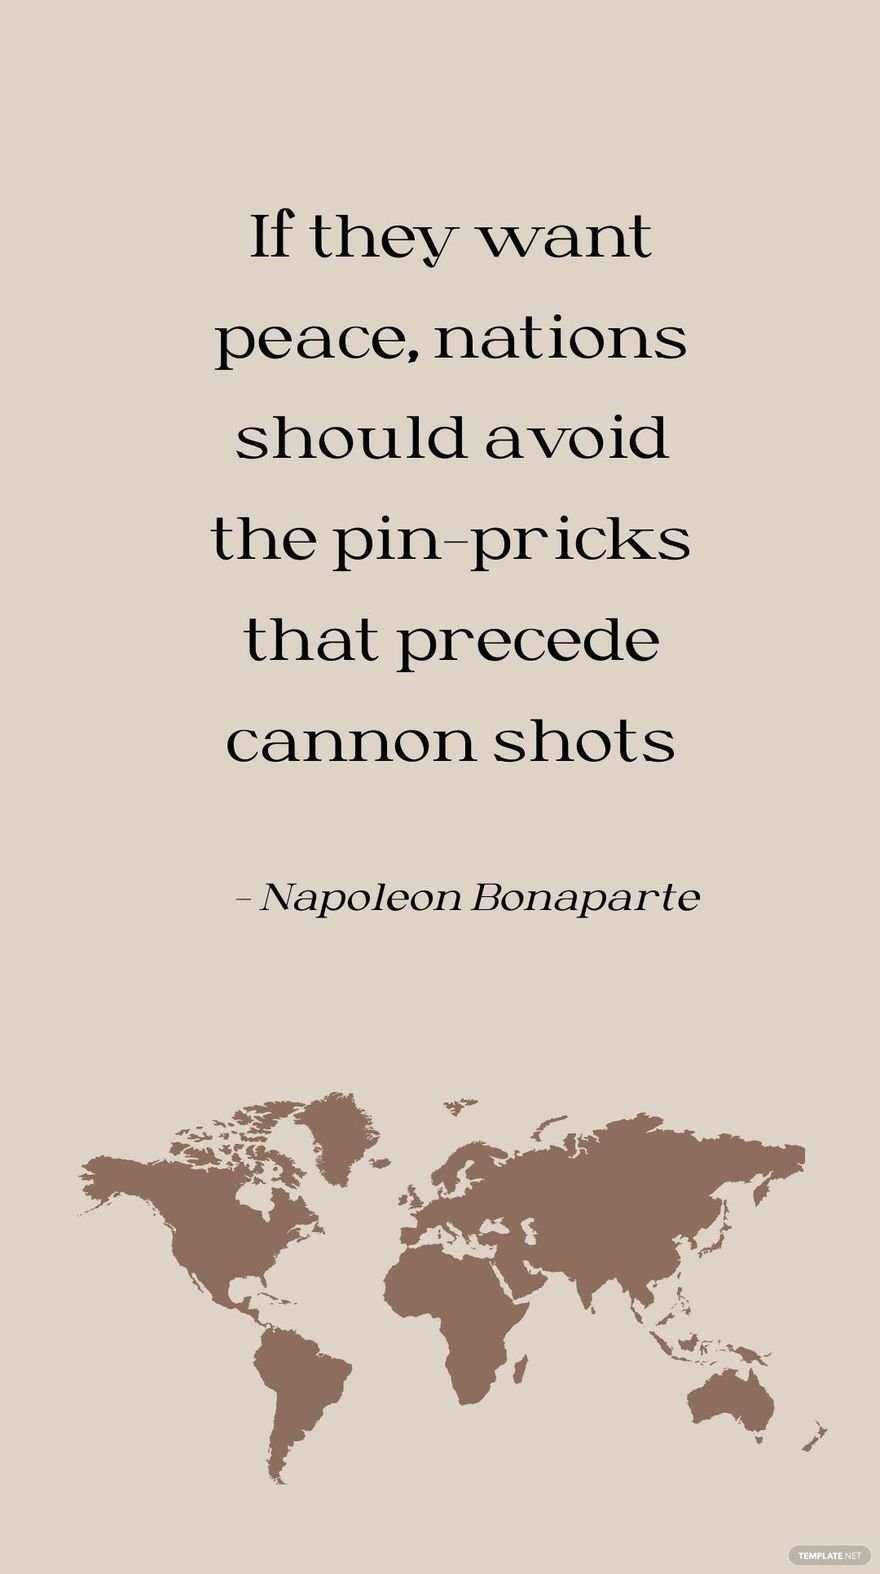 Free Napoleon Bonaparte - If they want peace, nations should avoid the pin-pricks that precede cannon shots in JPG